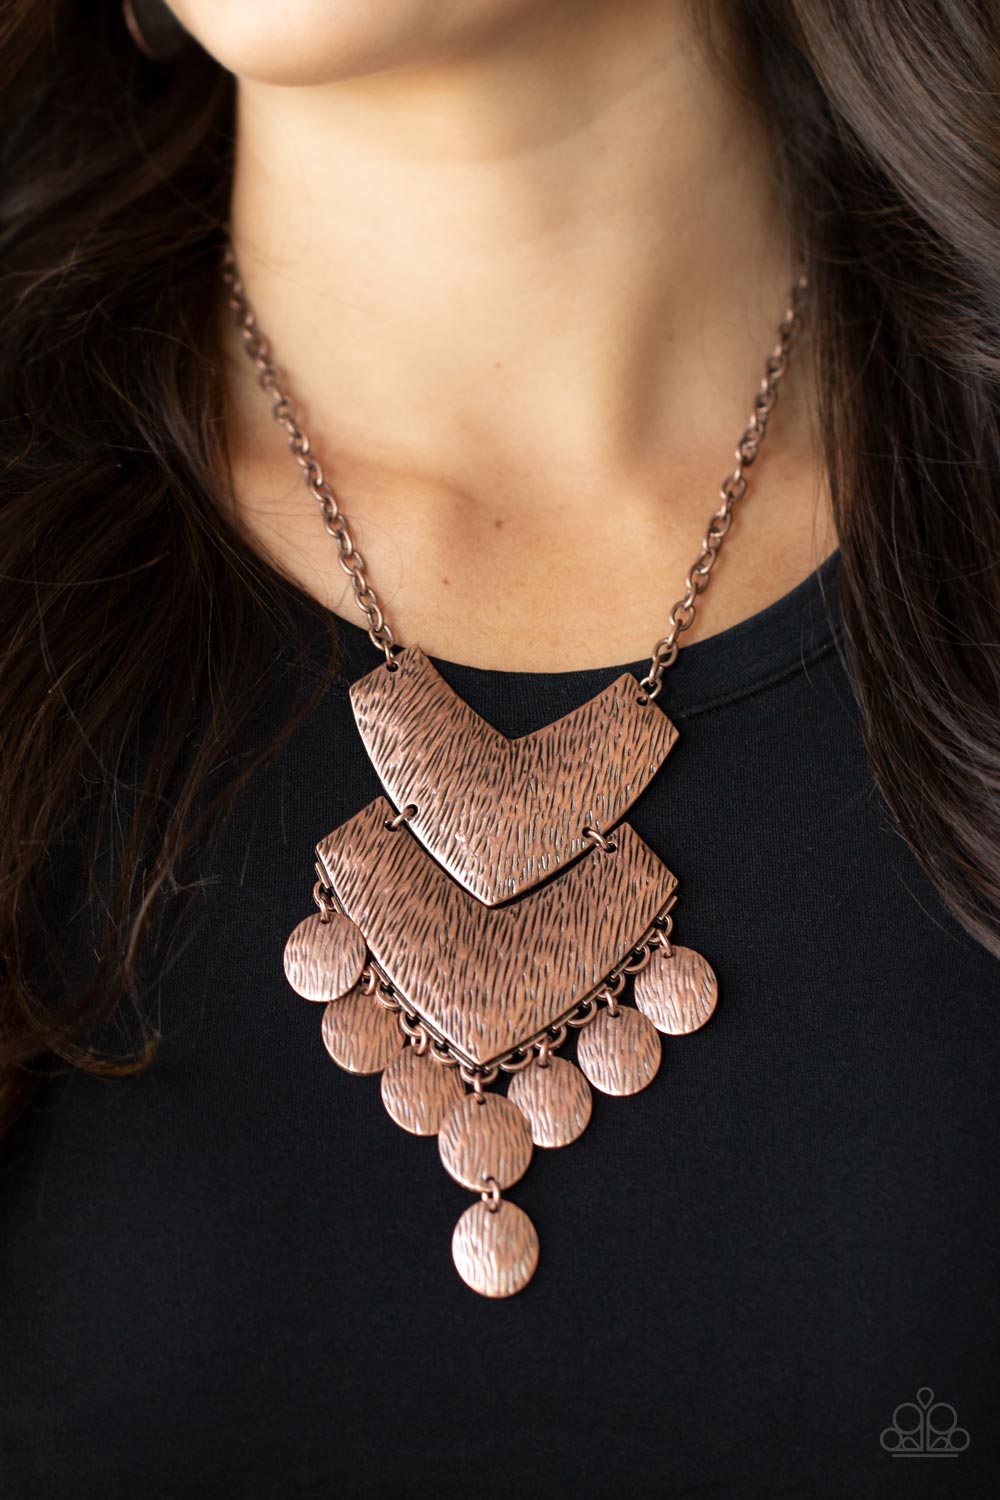 Keys to the Animal Kingdom - Copper Necklaces etched in rustic copper textures, a pair oversized chevron-like copper frames delicately link into a wild statement piece. Matching textured copper discs swing from the bottom of the stacked display, adding noisemaking movement to the rambunctious pendant. Features an adjustable clasp closure.  Sold as one individual necklace. Includes one pair of matching earrings.